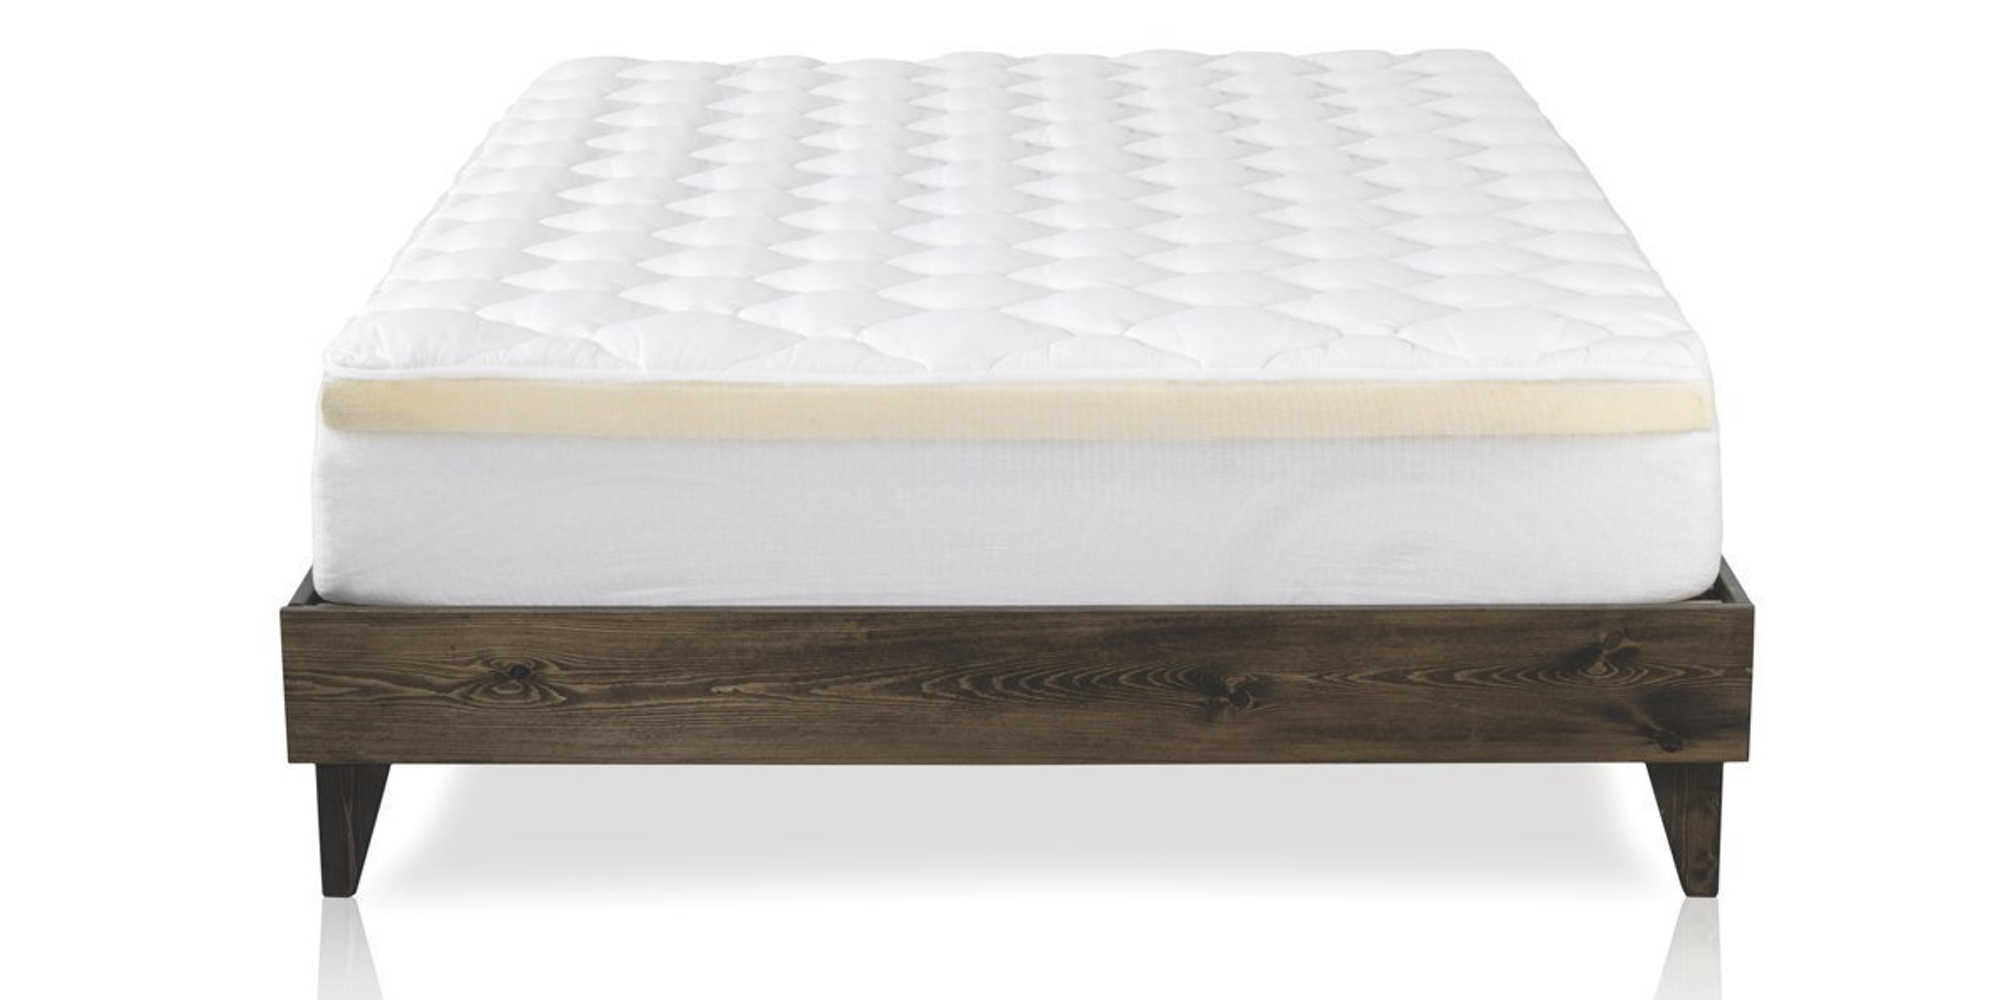 thick mattress pad for pack n play